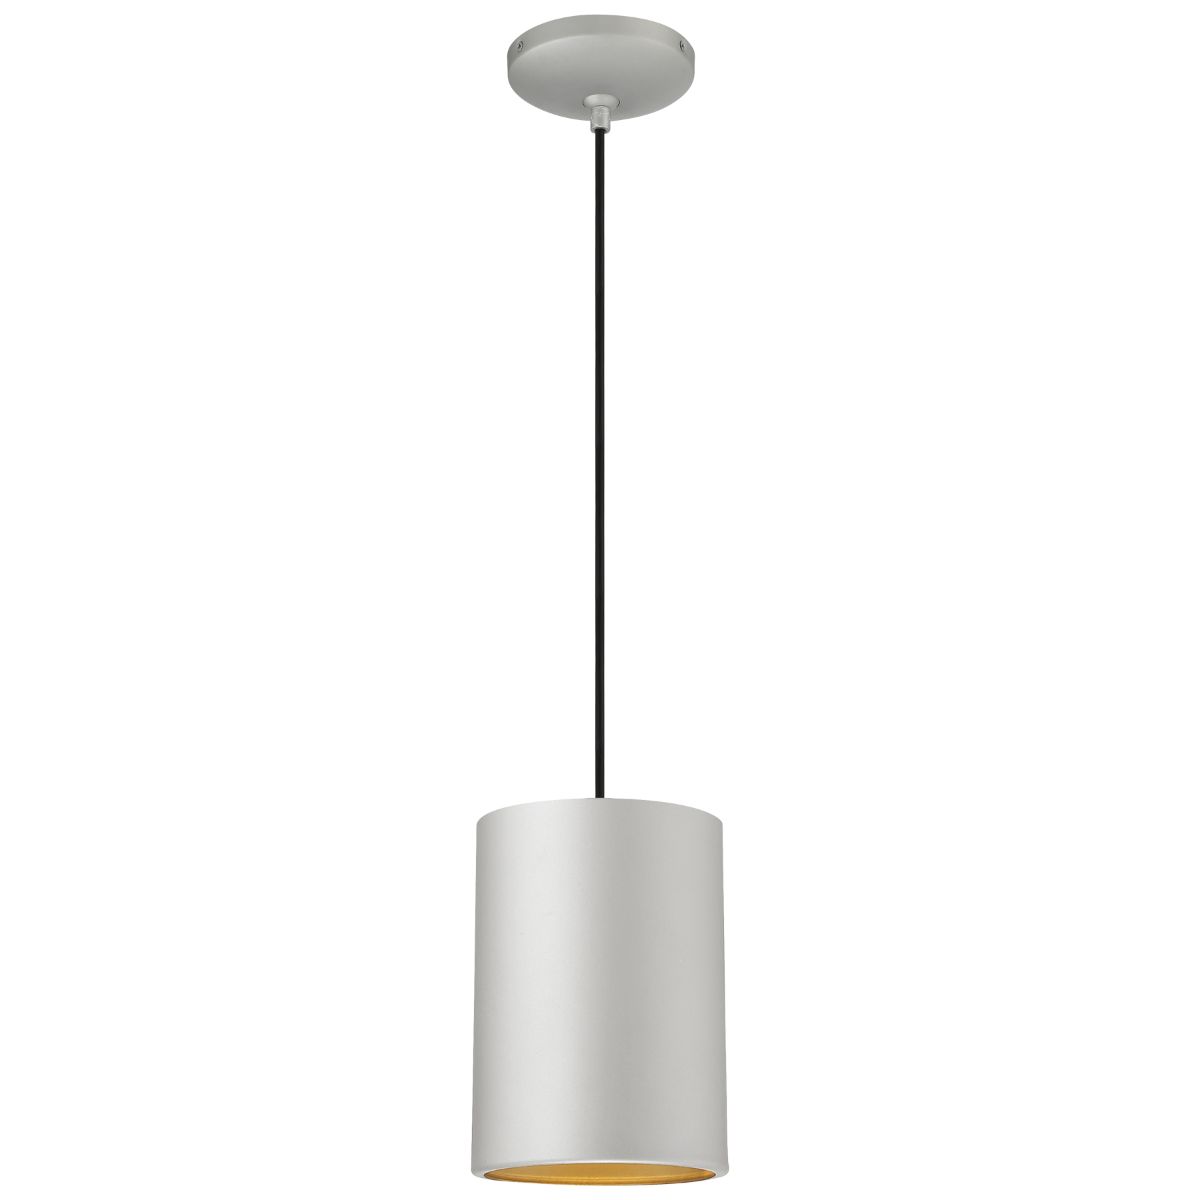 Pilson XL 7 in. Pendant Light with Cord